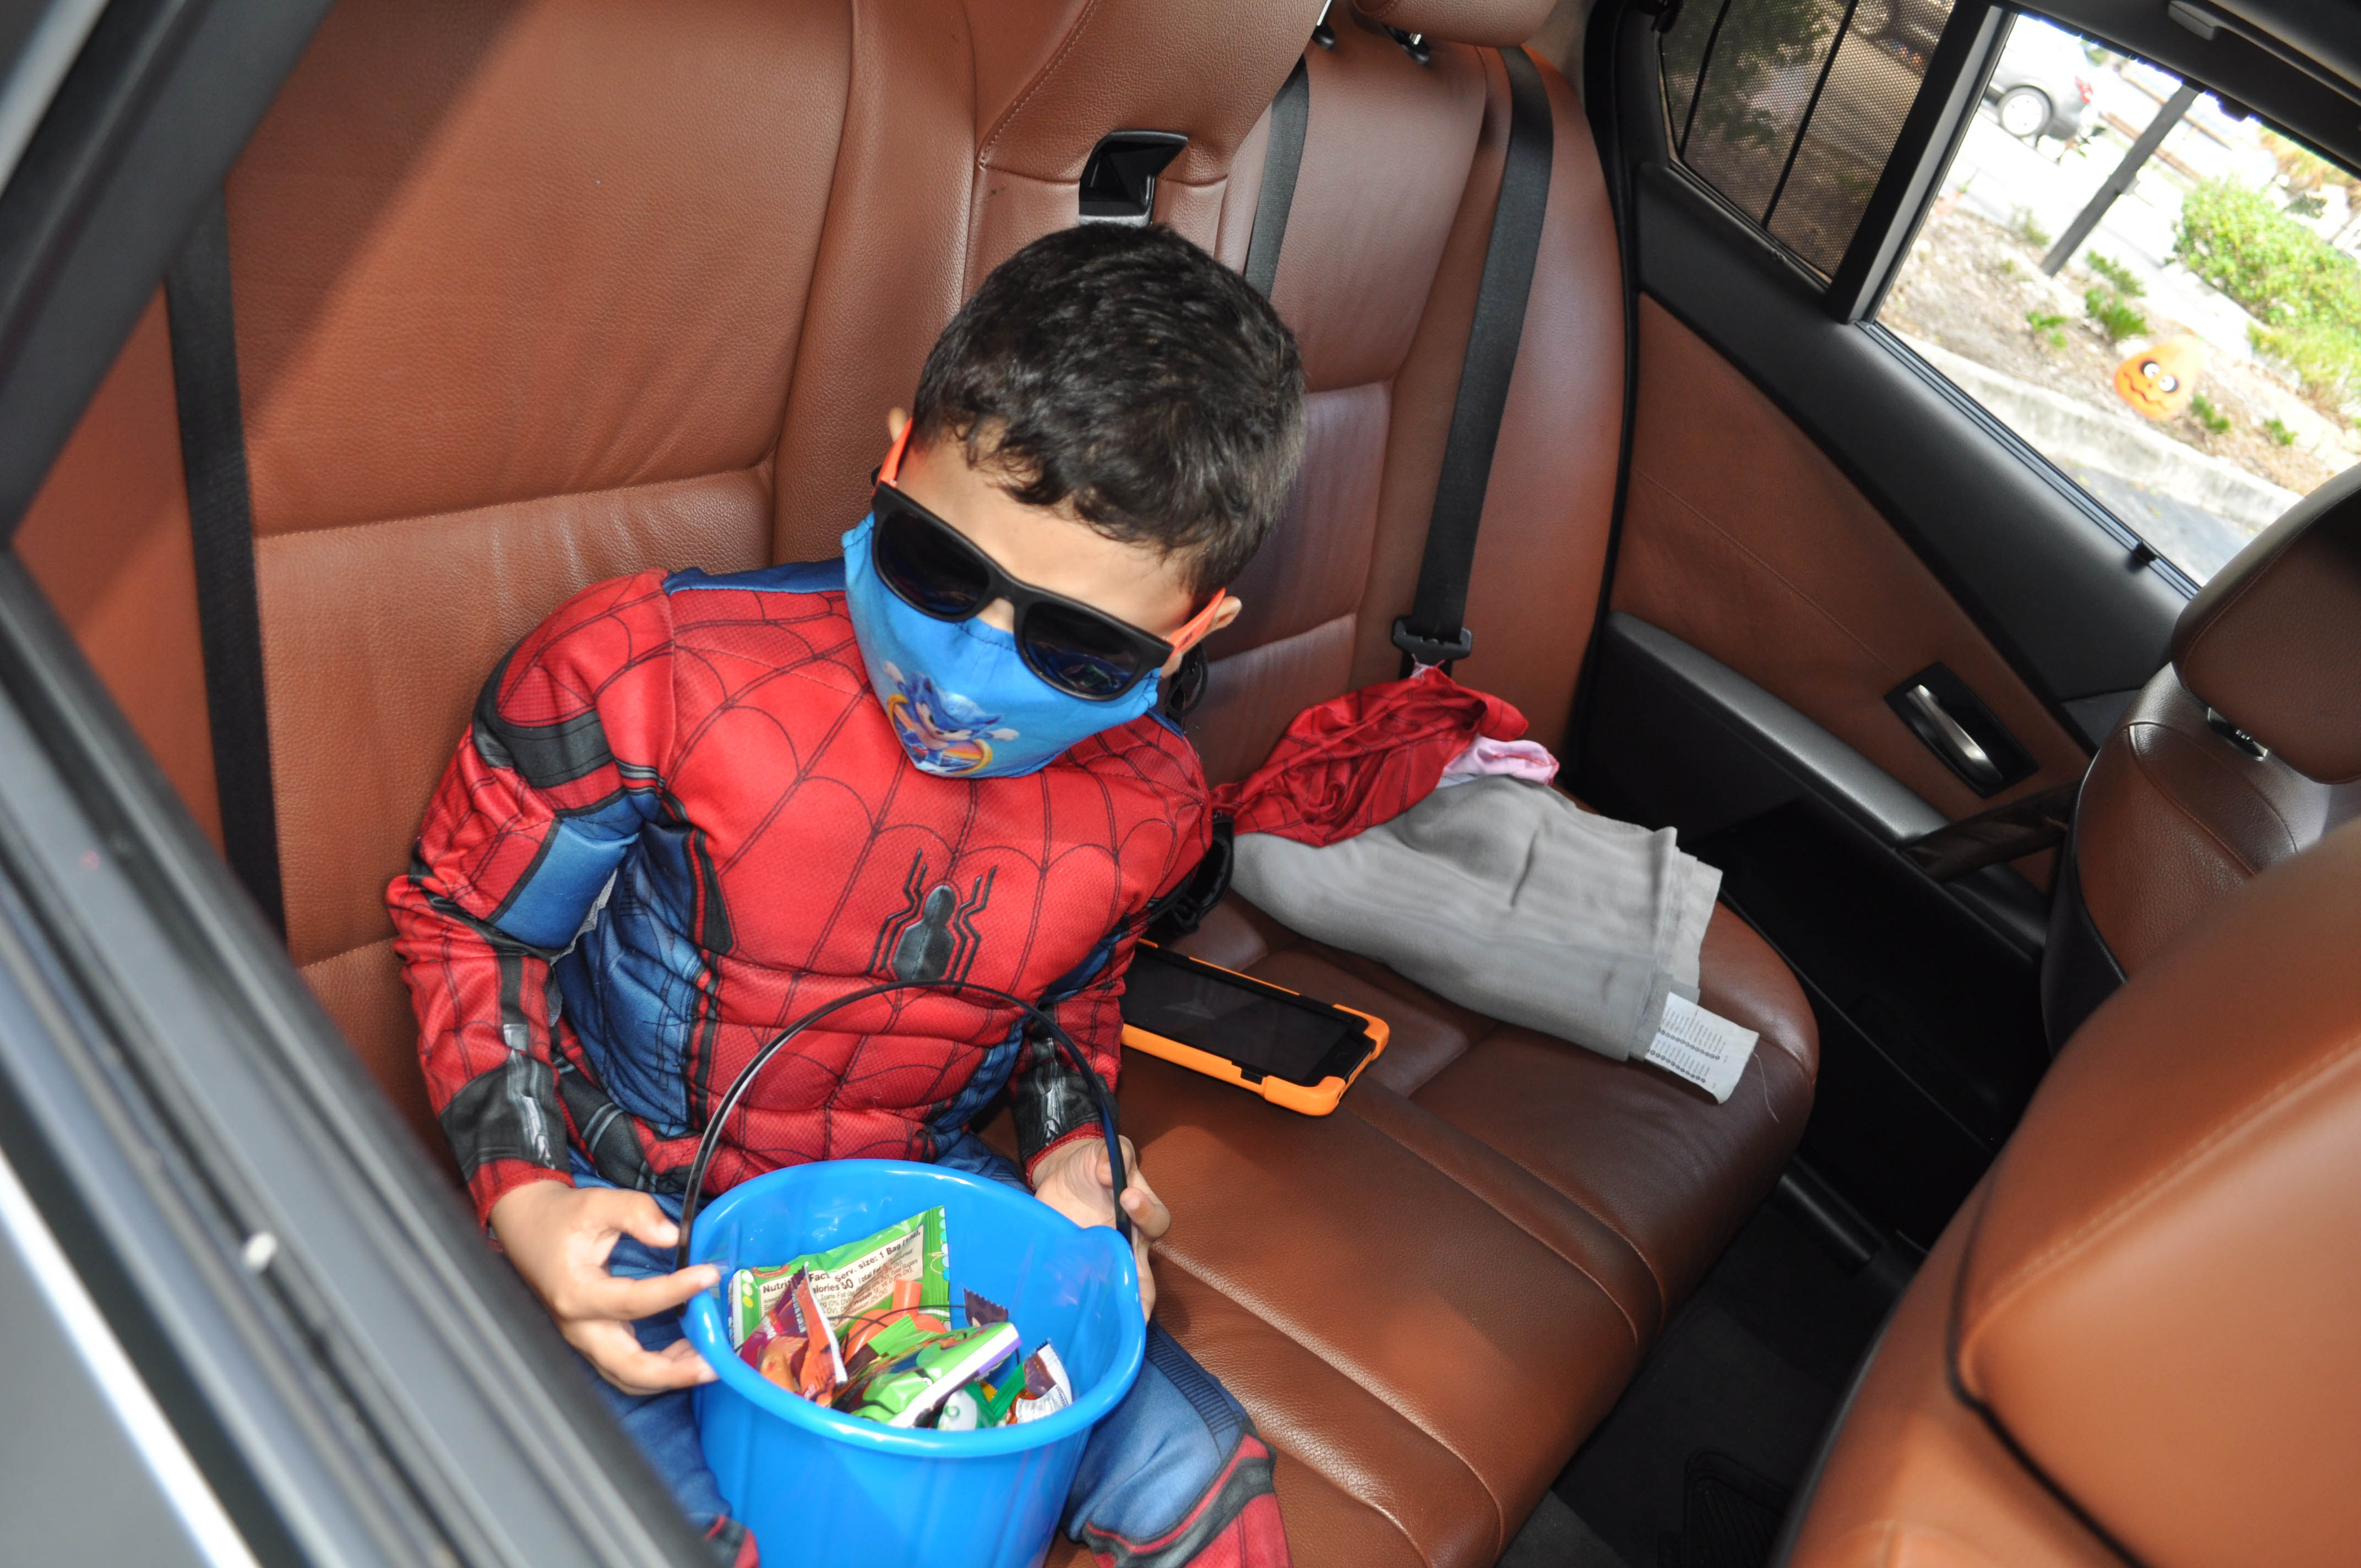 Lighthouse of Broward client Matthew Caraballo dressed as Spiderman shows off his candy